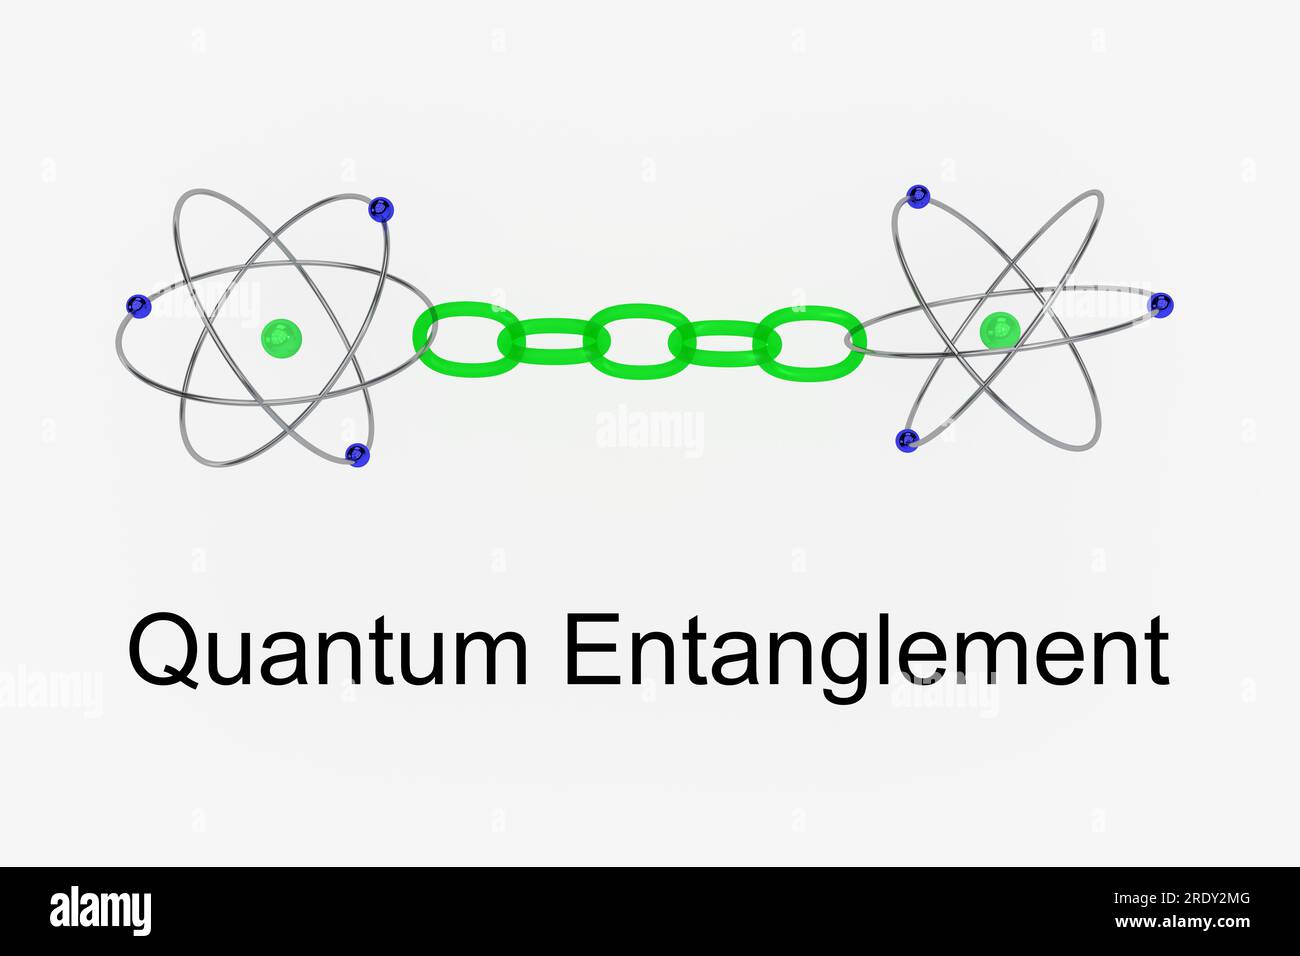 3D illustration of two atoms symbolicaly linked by a tranparent chain, titled as Quantum Entanglement. Stock Photo